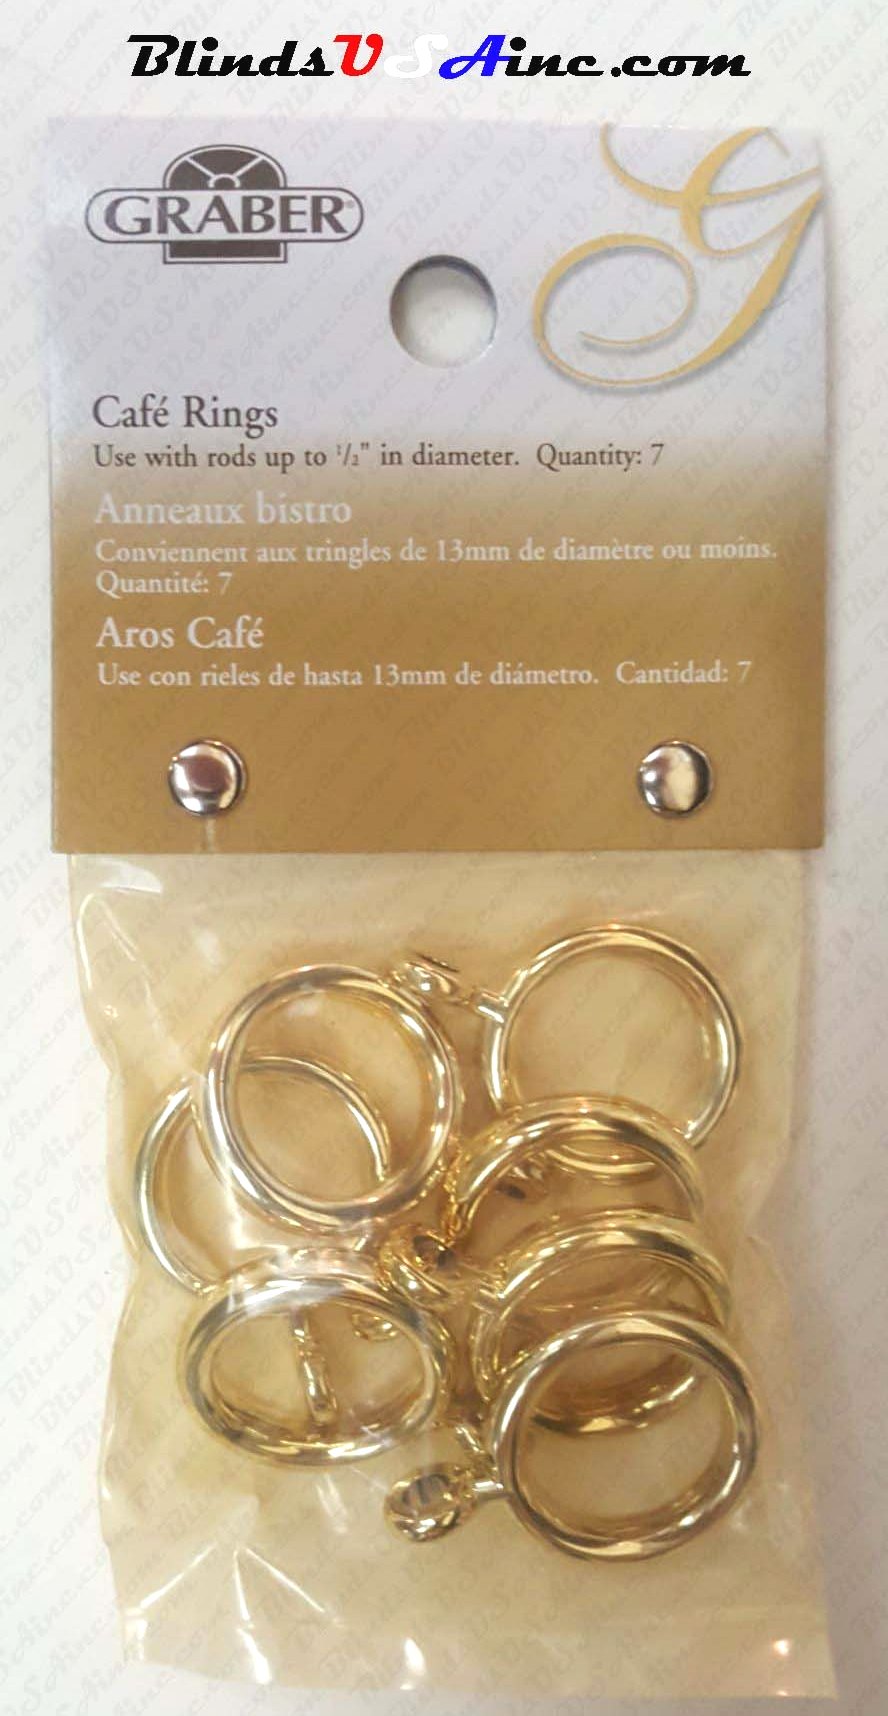 Graber 1/2" Cafe' Rings with Eyelet, finish brass, pack of 7, Part # 5-860-8